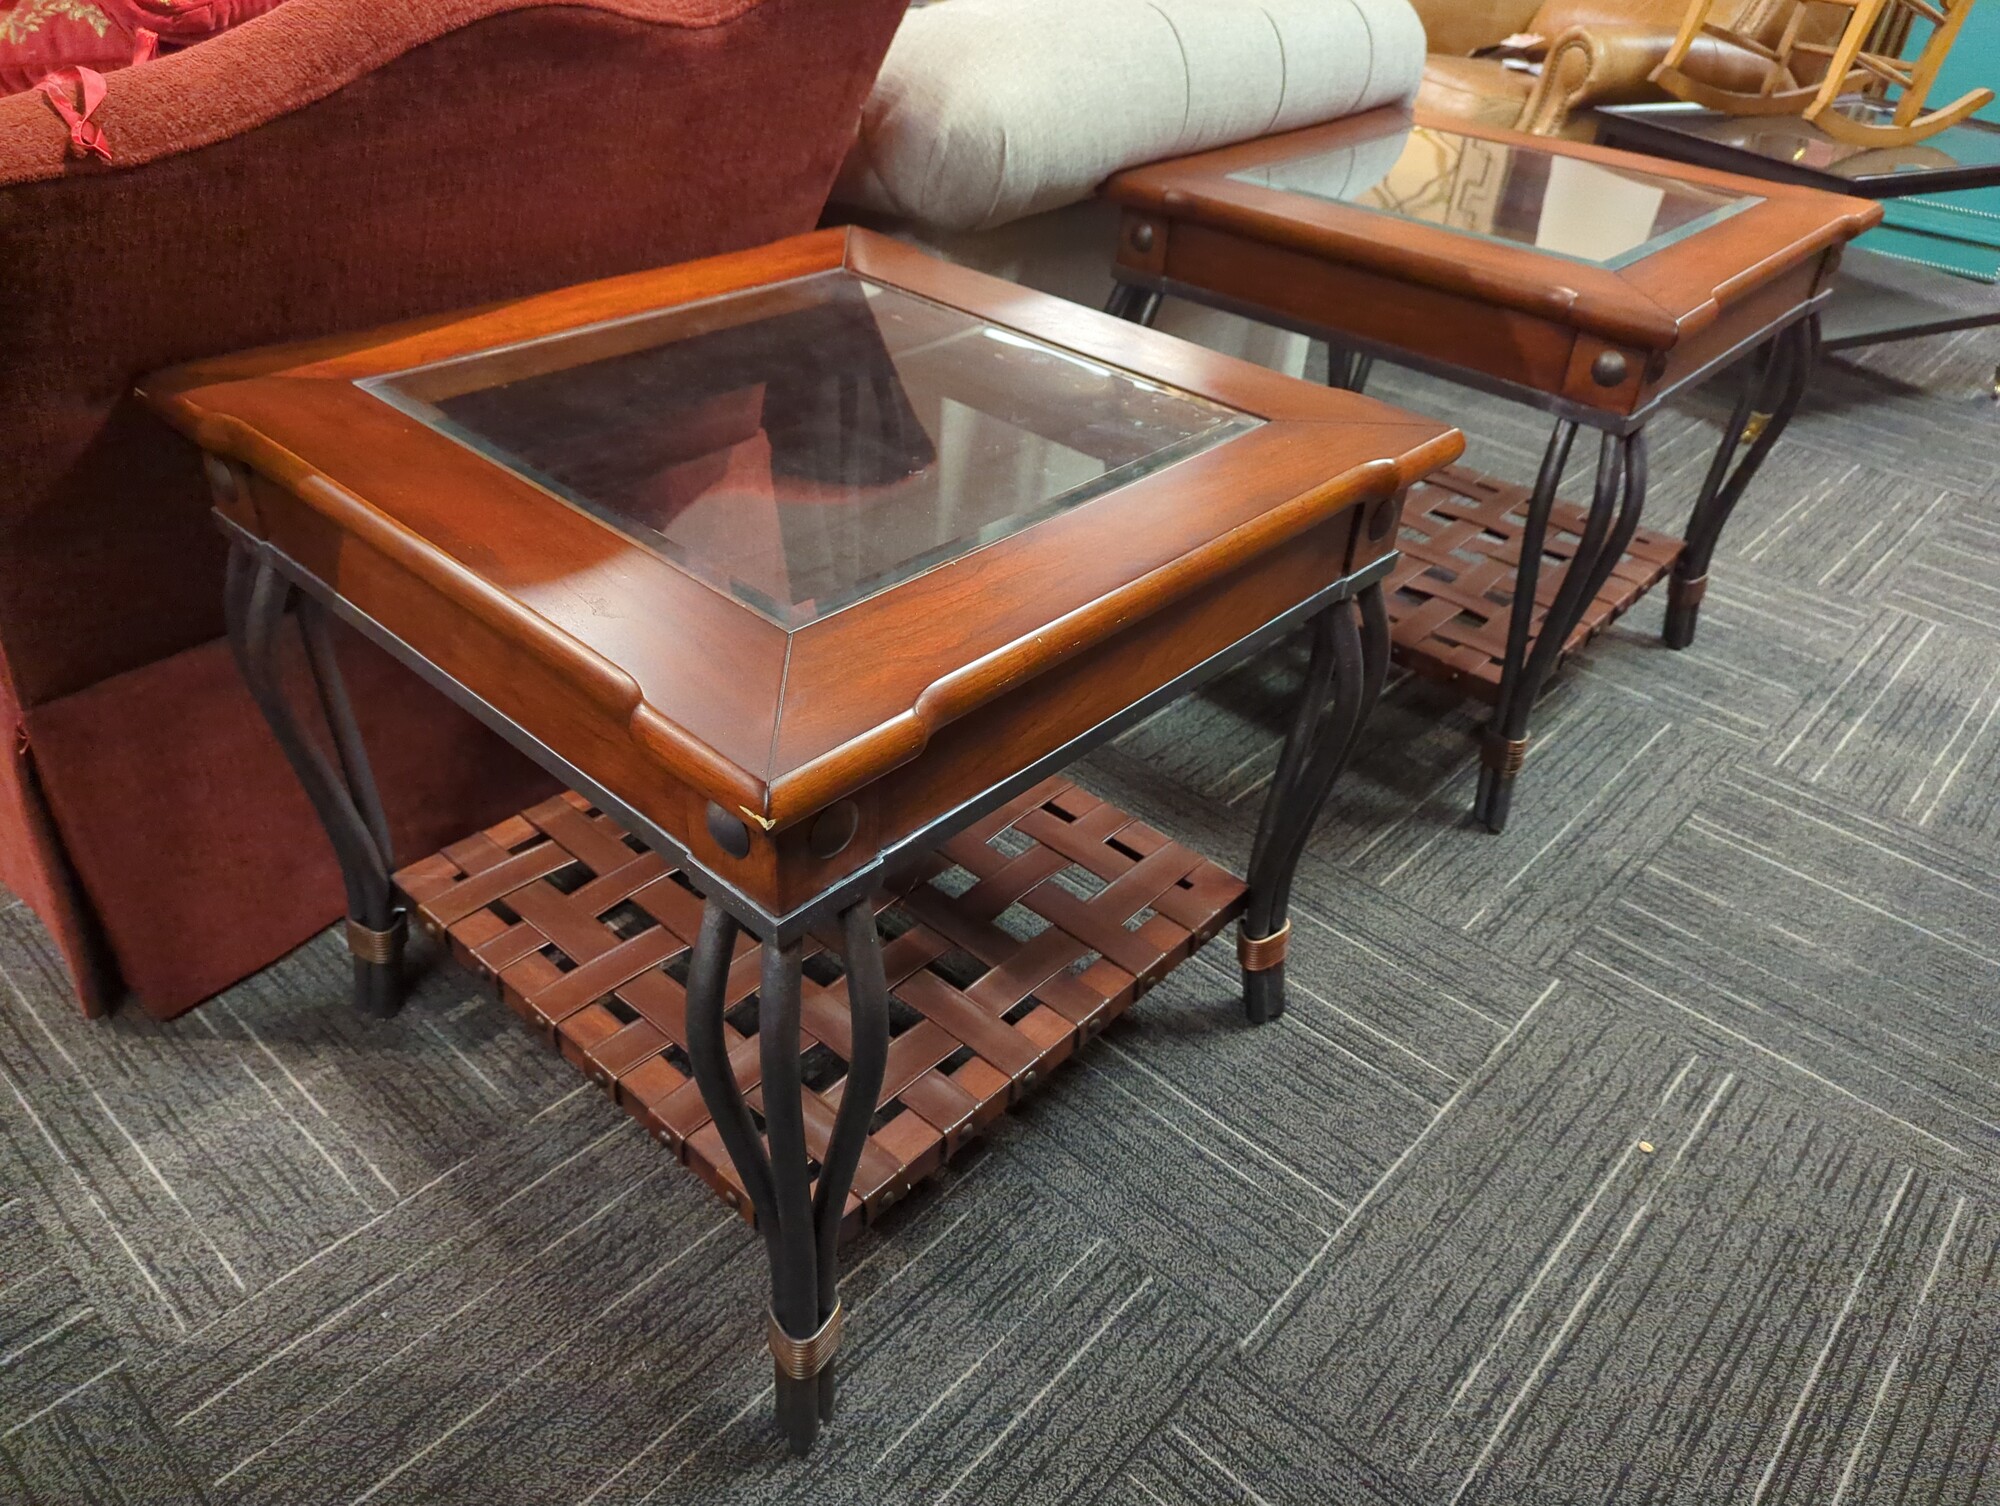 Pair of glass top side tables. 28in x 28in top 25in high.